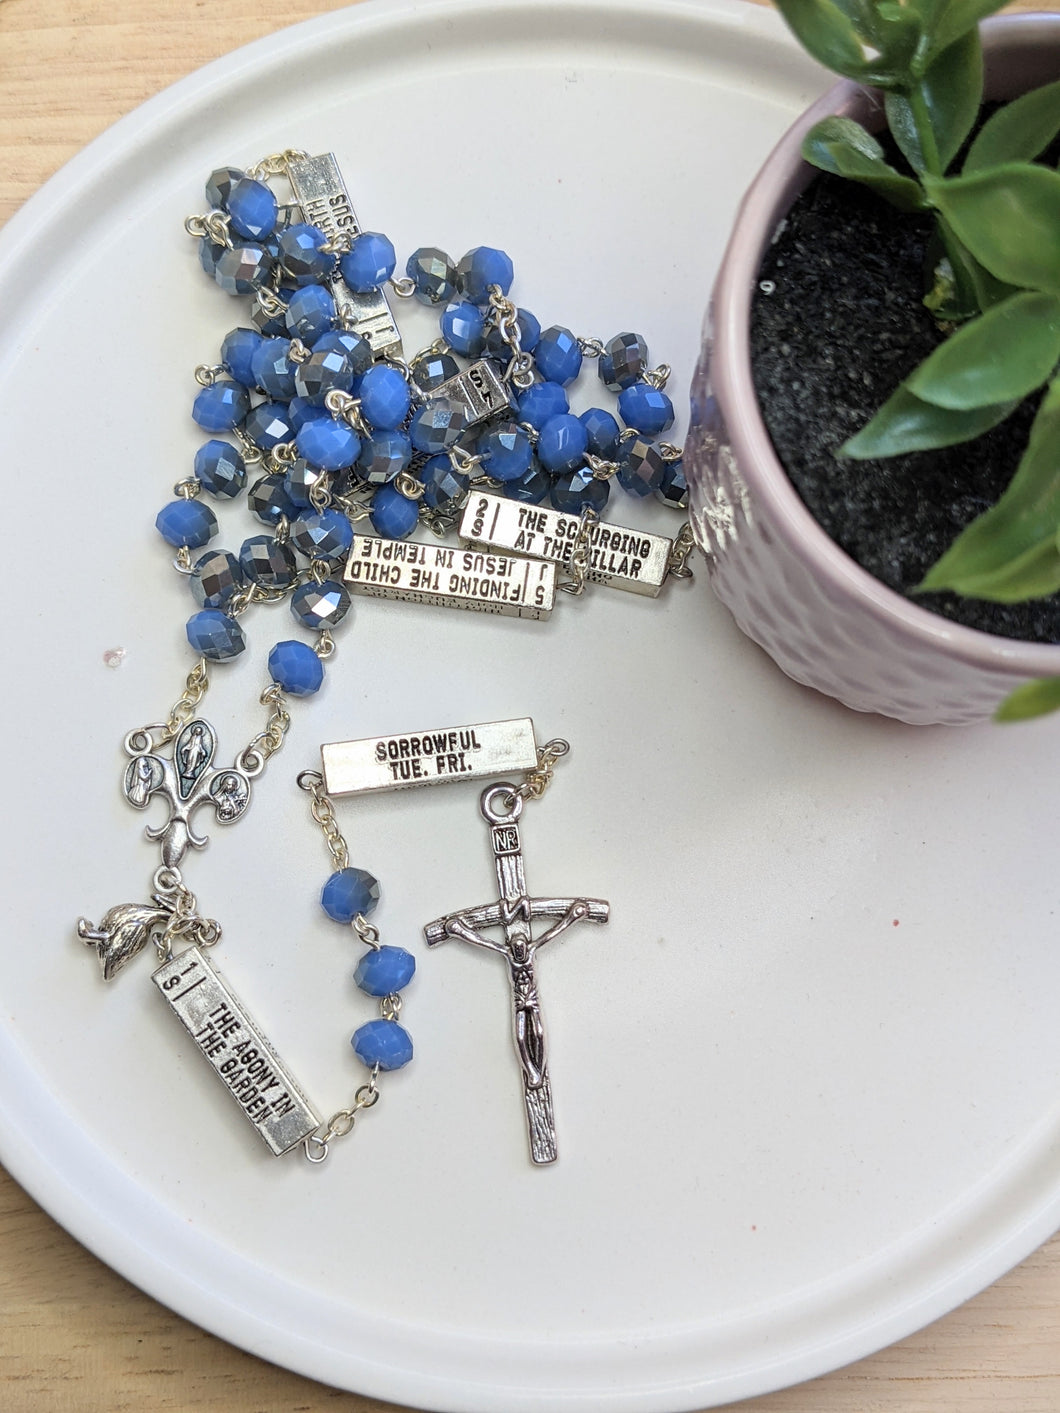 A light blue and silver catholic rosary that has silver bars that list themysteries of the Rosary on each bar laus against a white plate with a small fake plant next to it. 